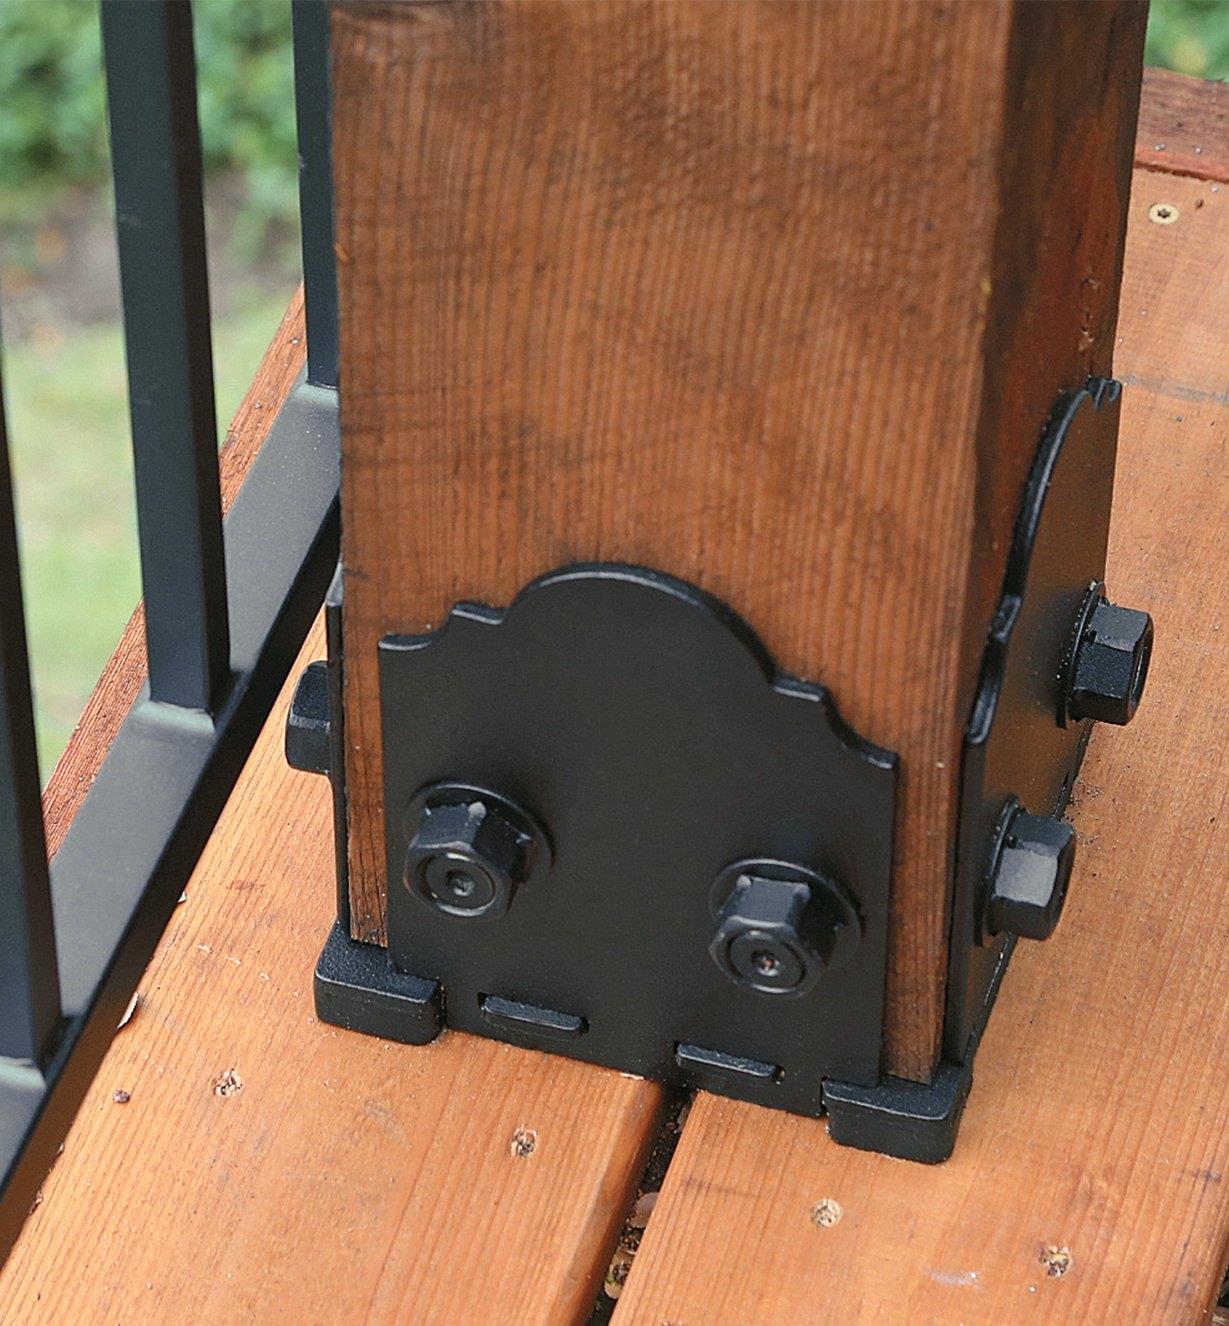 Ozco 6x6 Post Base used on a deck post